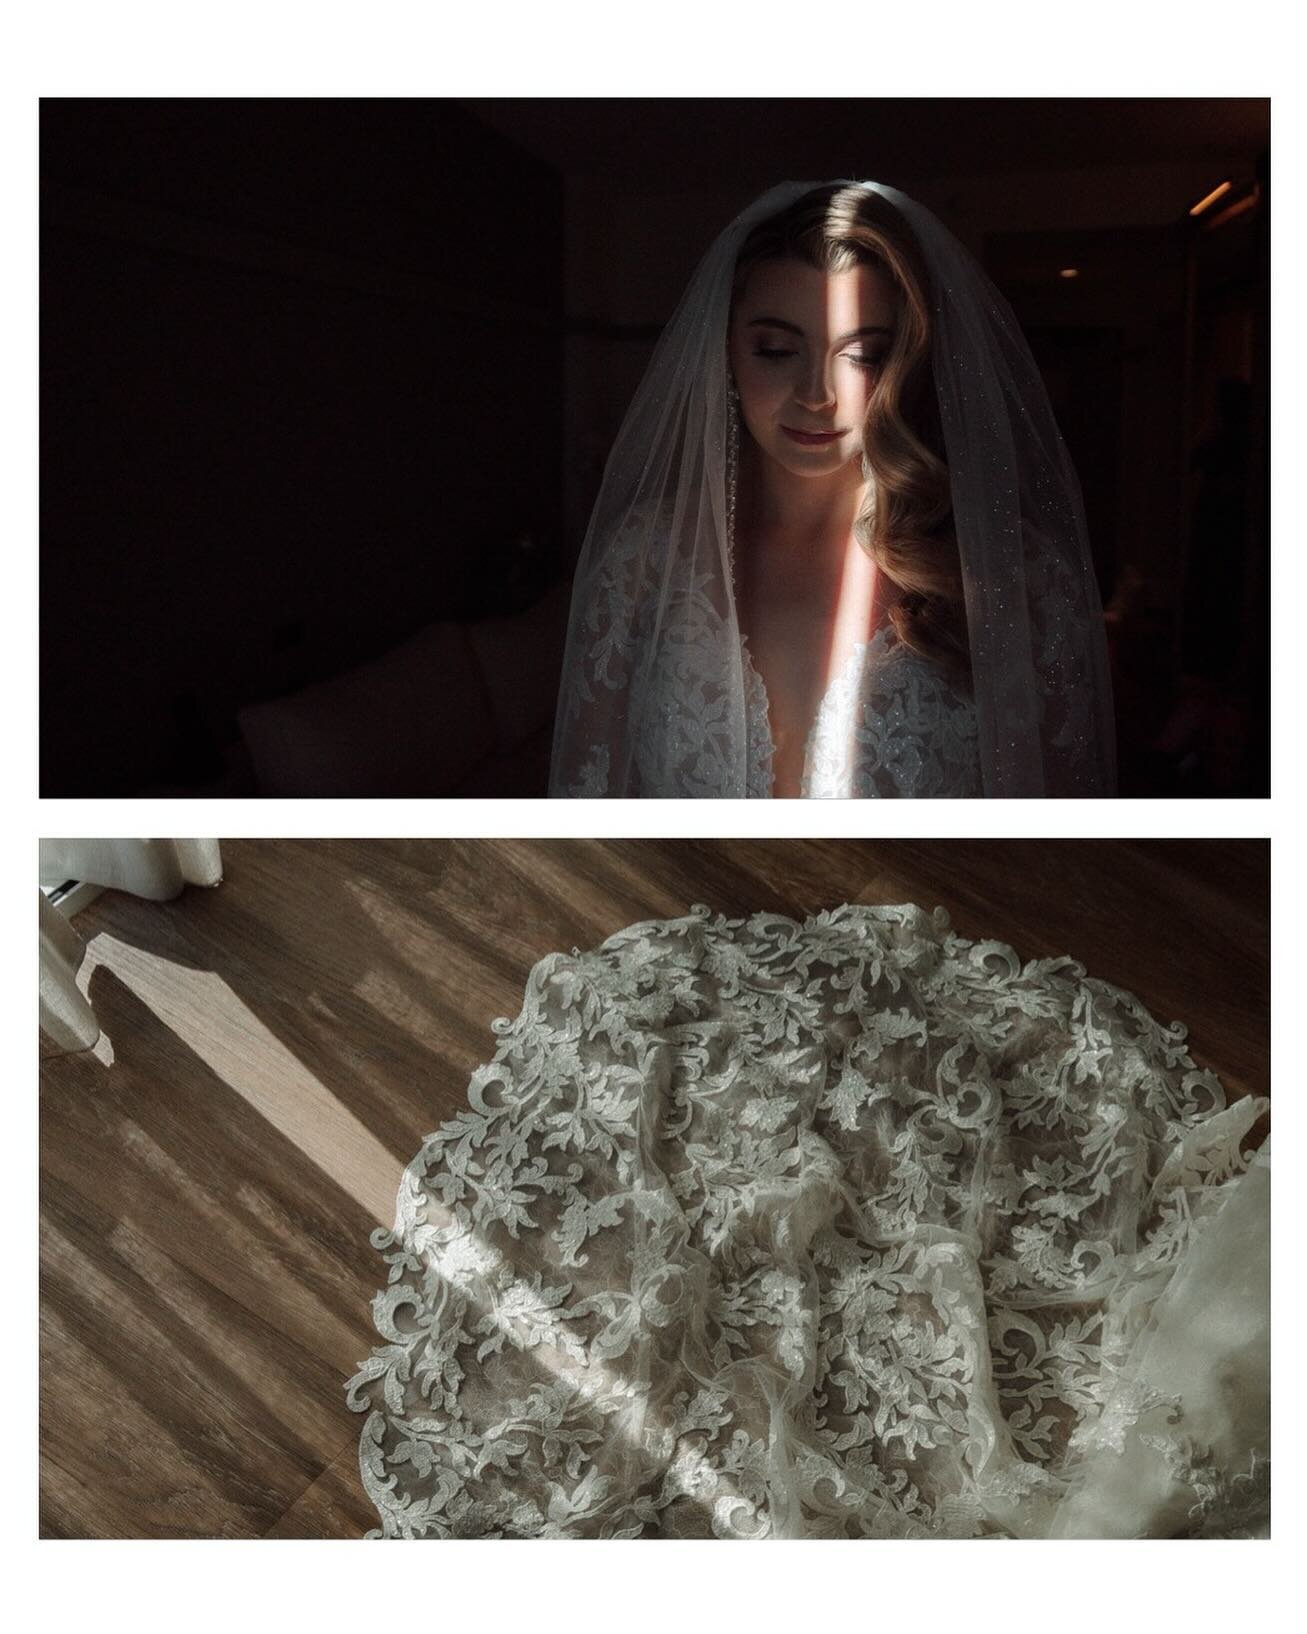 Some moody wedding vibes for a rainy Wednesday here in Philly. @beccaferrarax0 

#phillyphotographer #philadelphiaphotographer #phillyweddingphotographer #philadelphiaweddingphotographer #phillyfilmphotographer #philadelphiafilmphotographer 

\/\/\/\